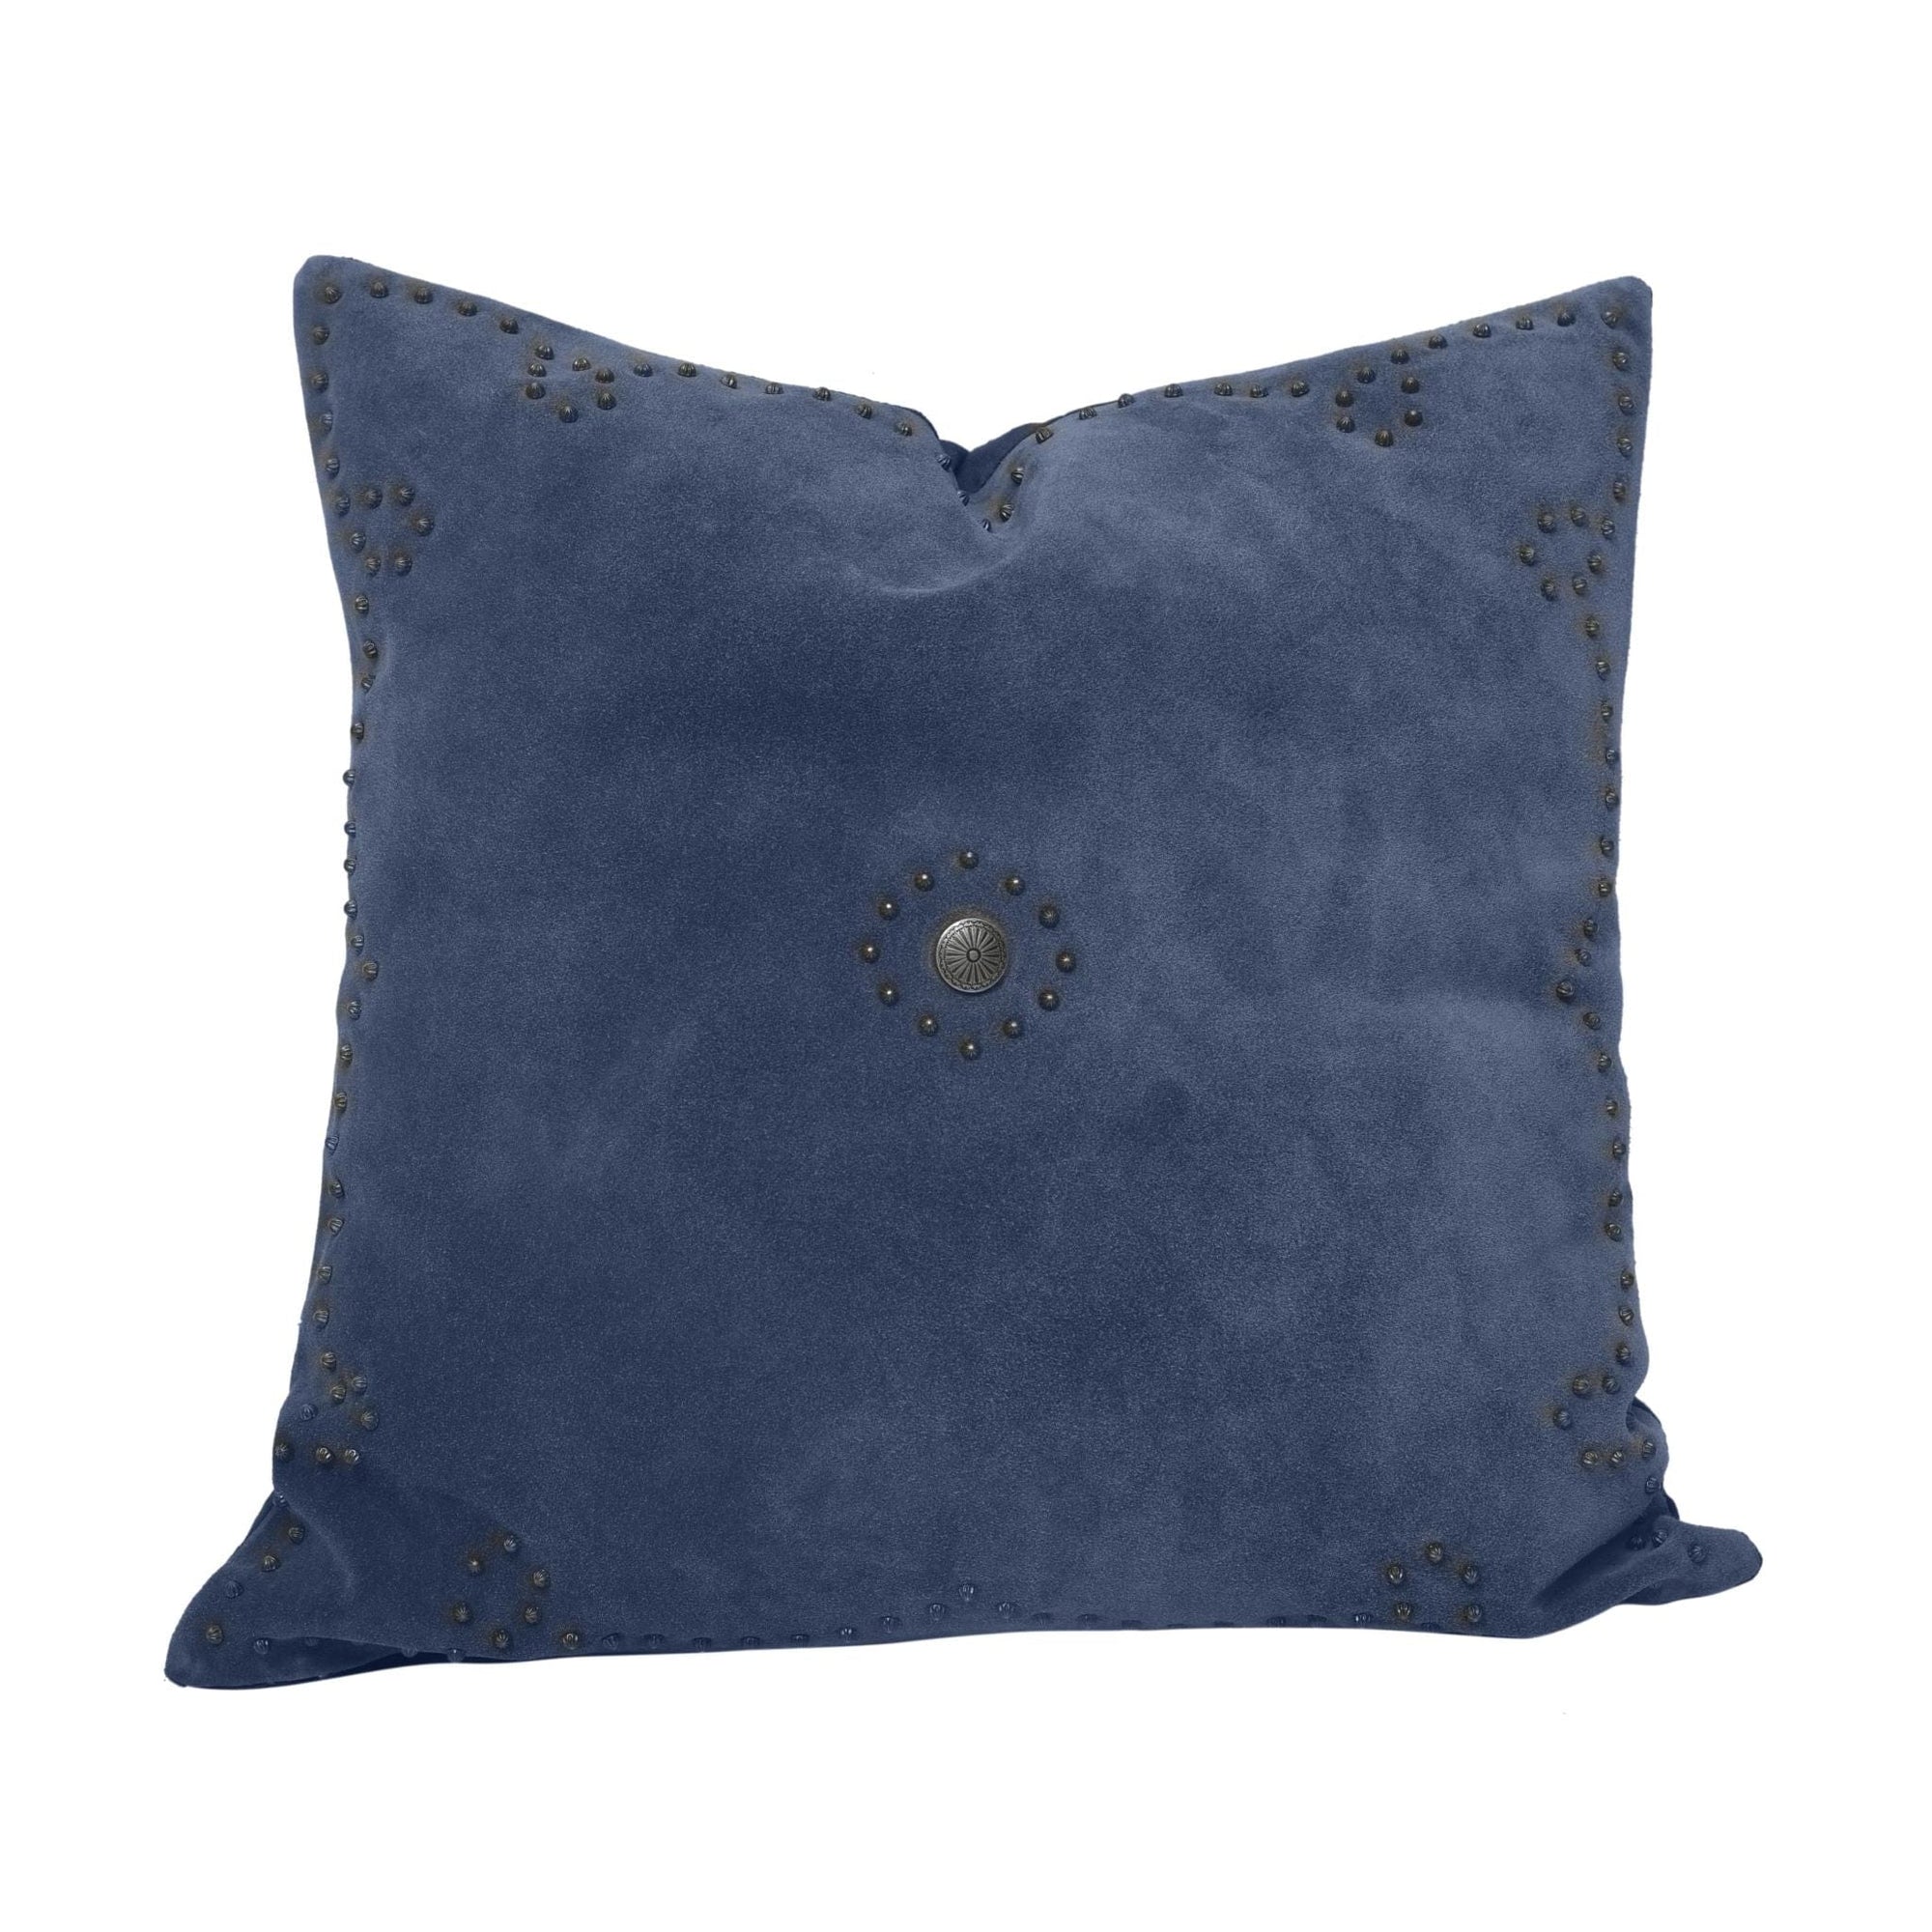 Western Suede Antique Silver Concho & Studded Pillow Navy Leather Pillow